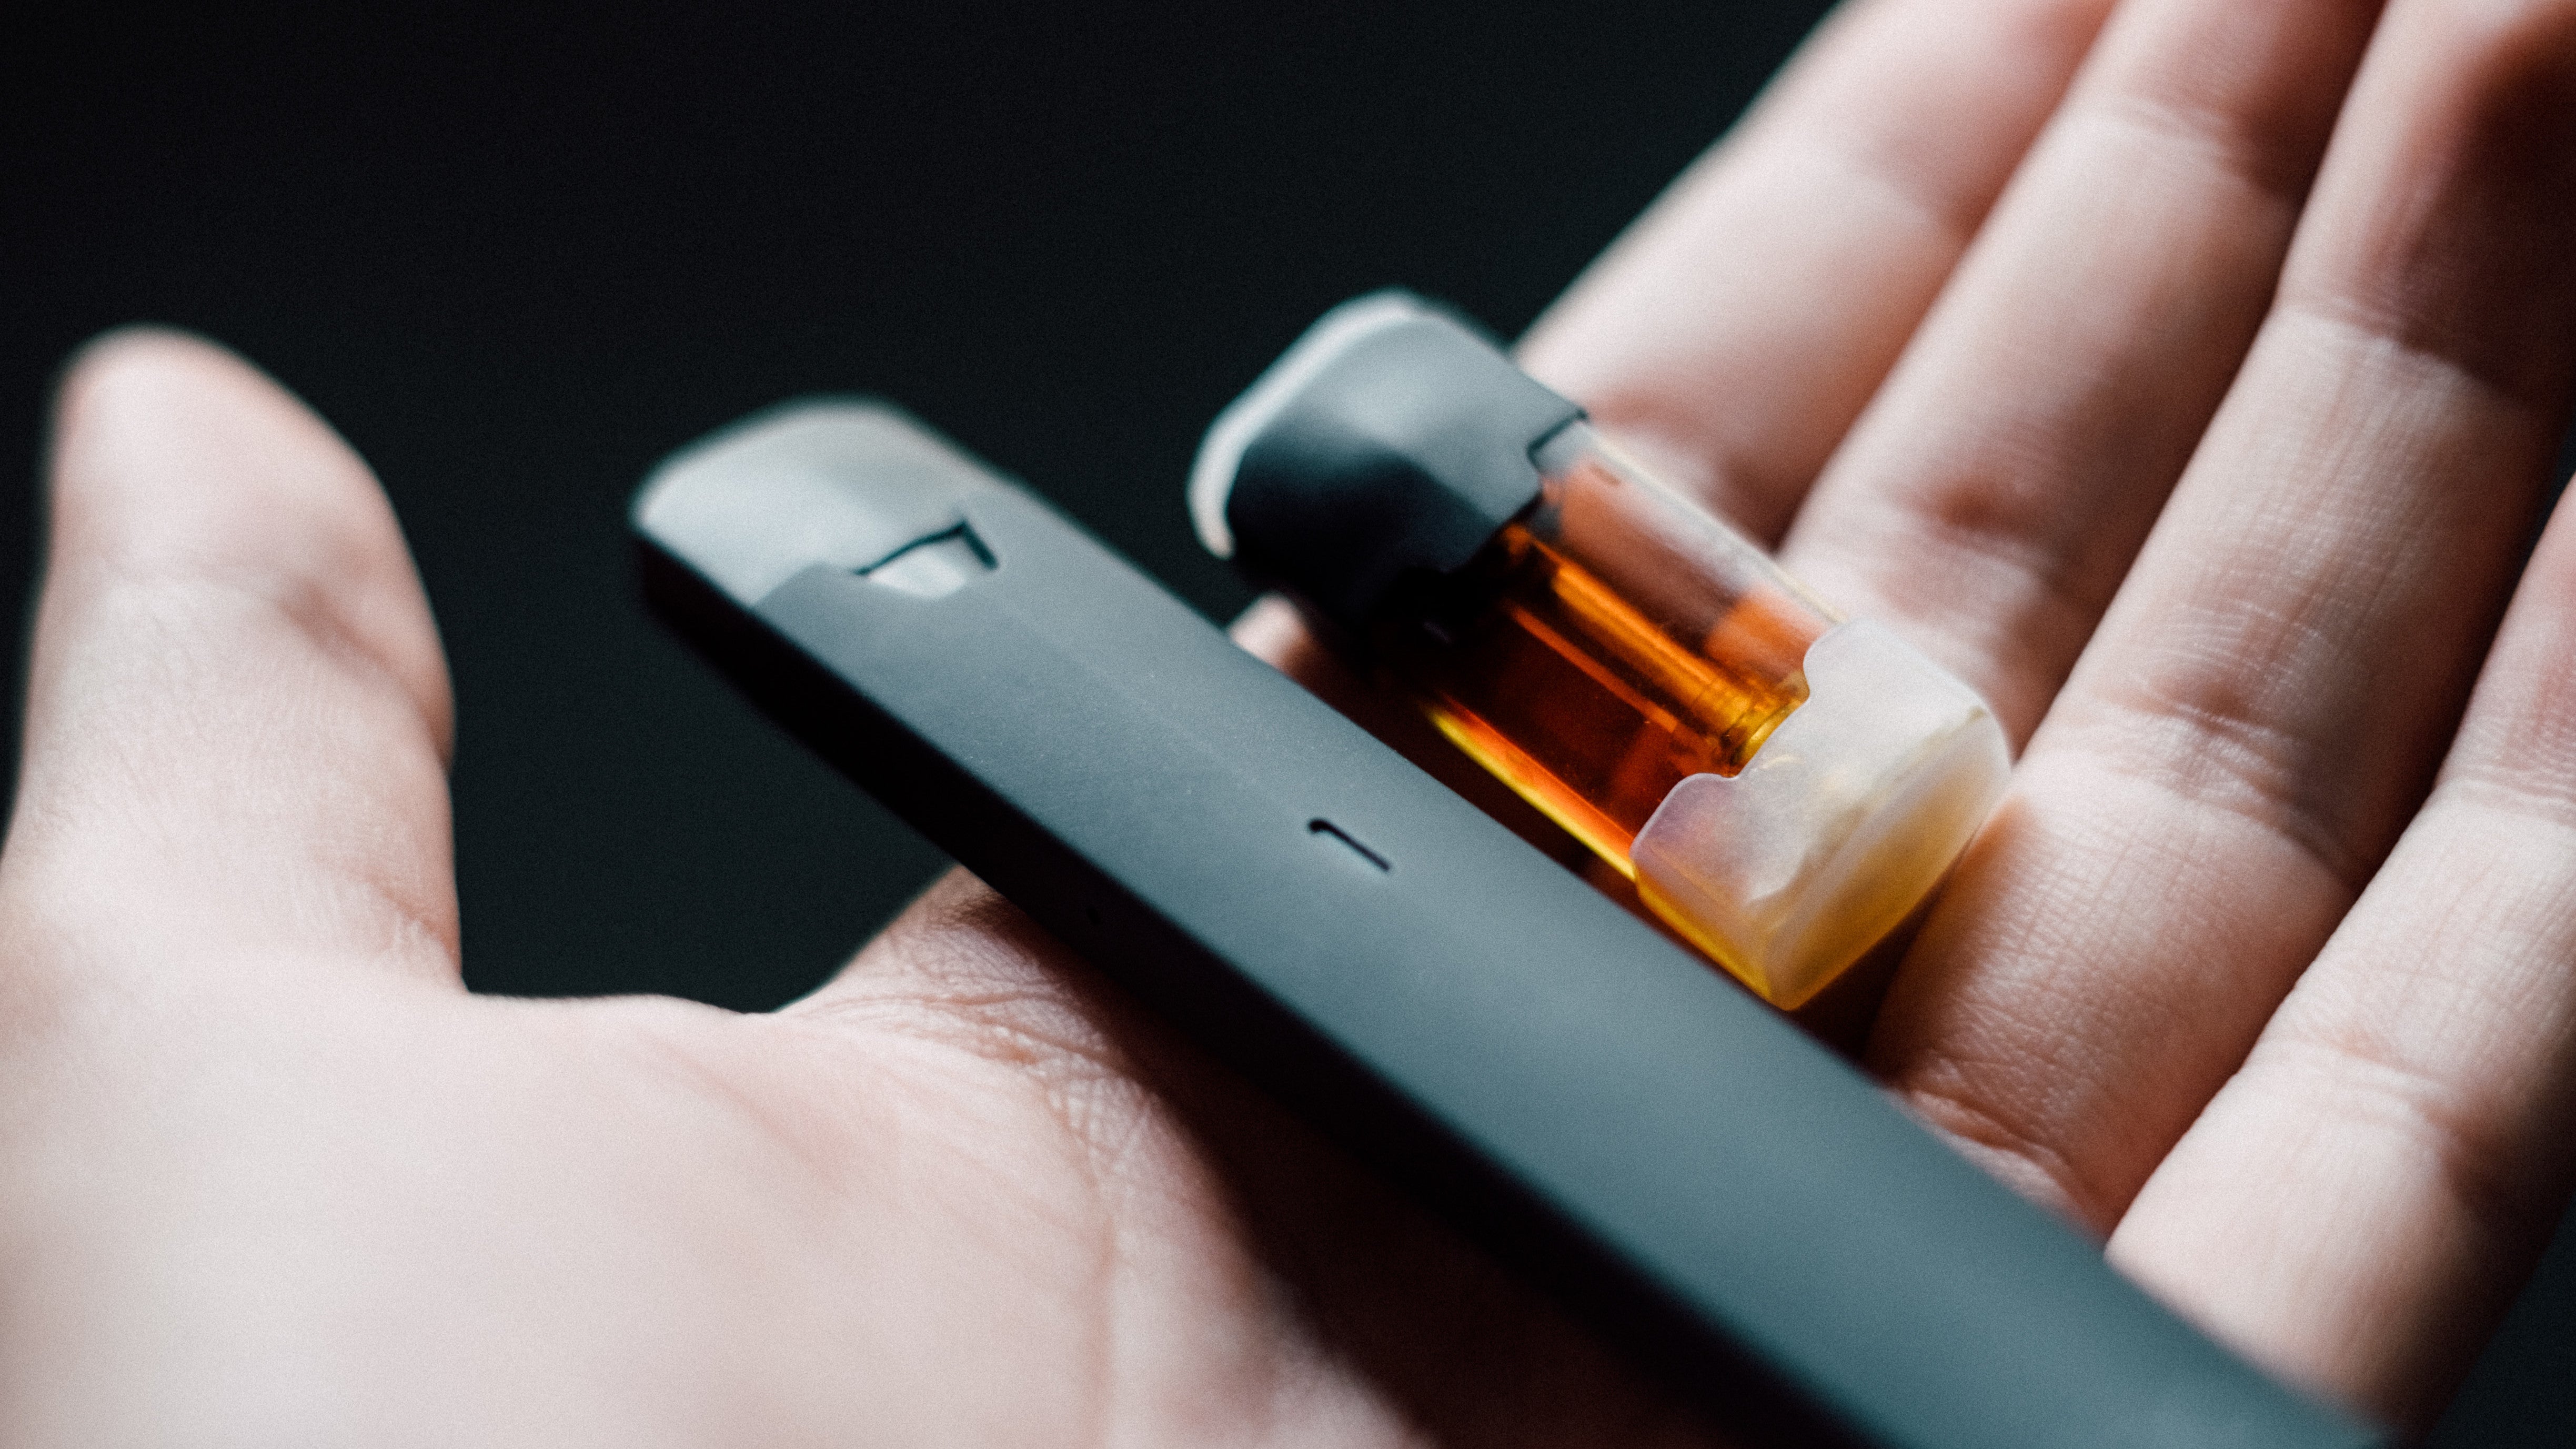 The CDC Just Confirmed That Vitamin E Acetate Is Their Prime Suspect In The Vaping Illnesses